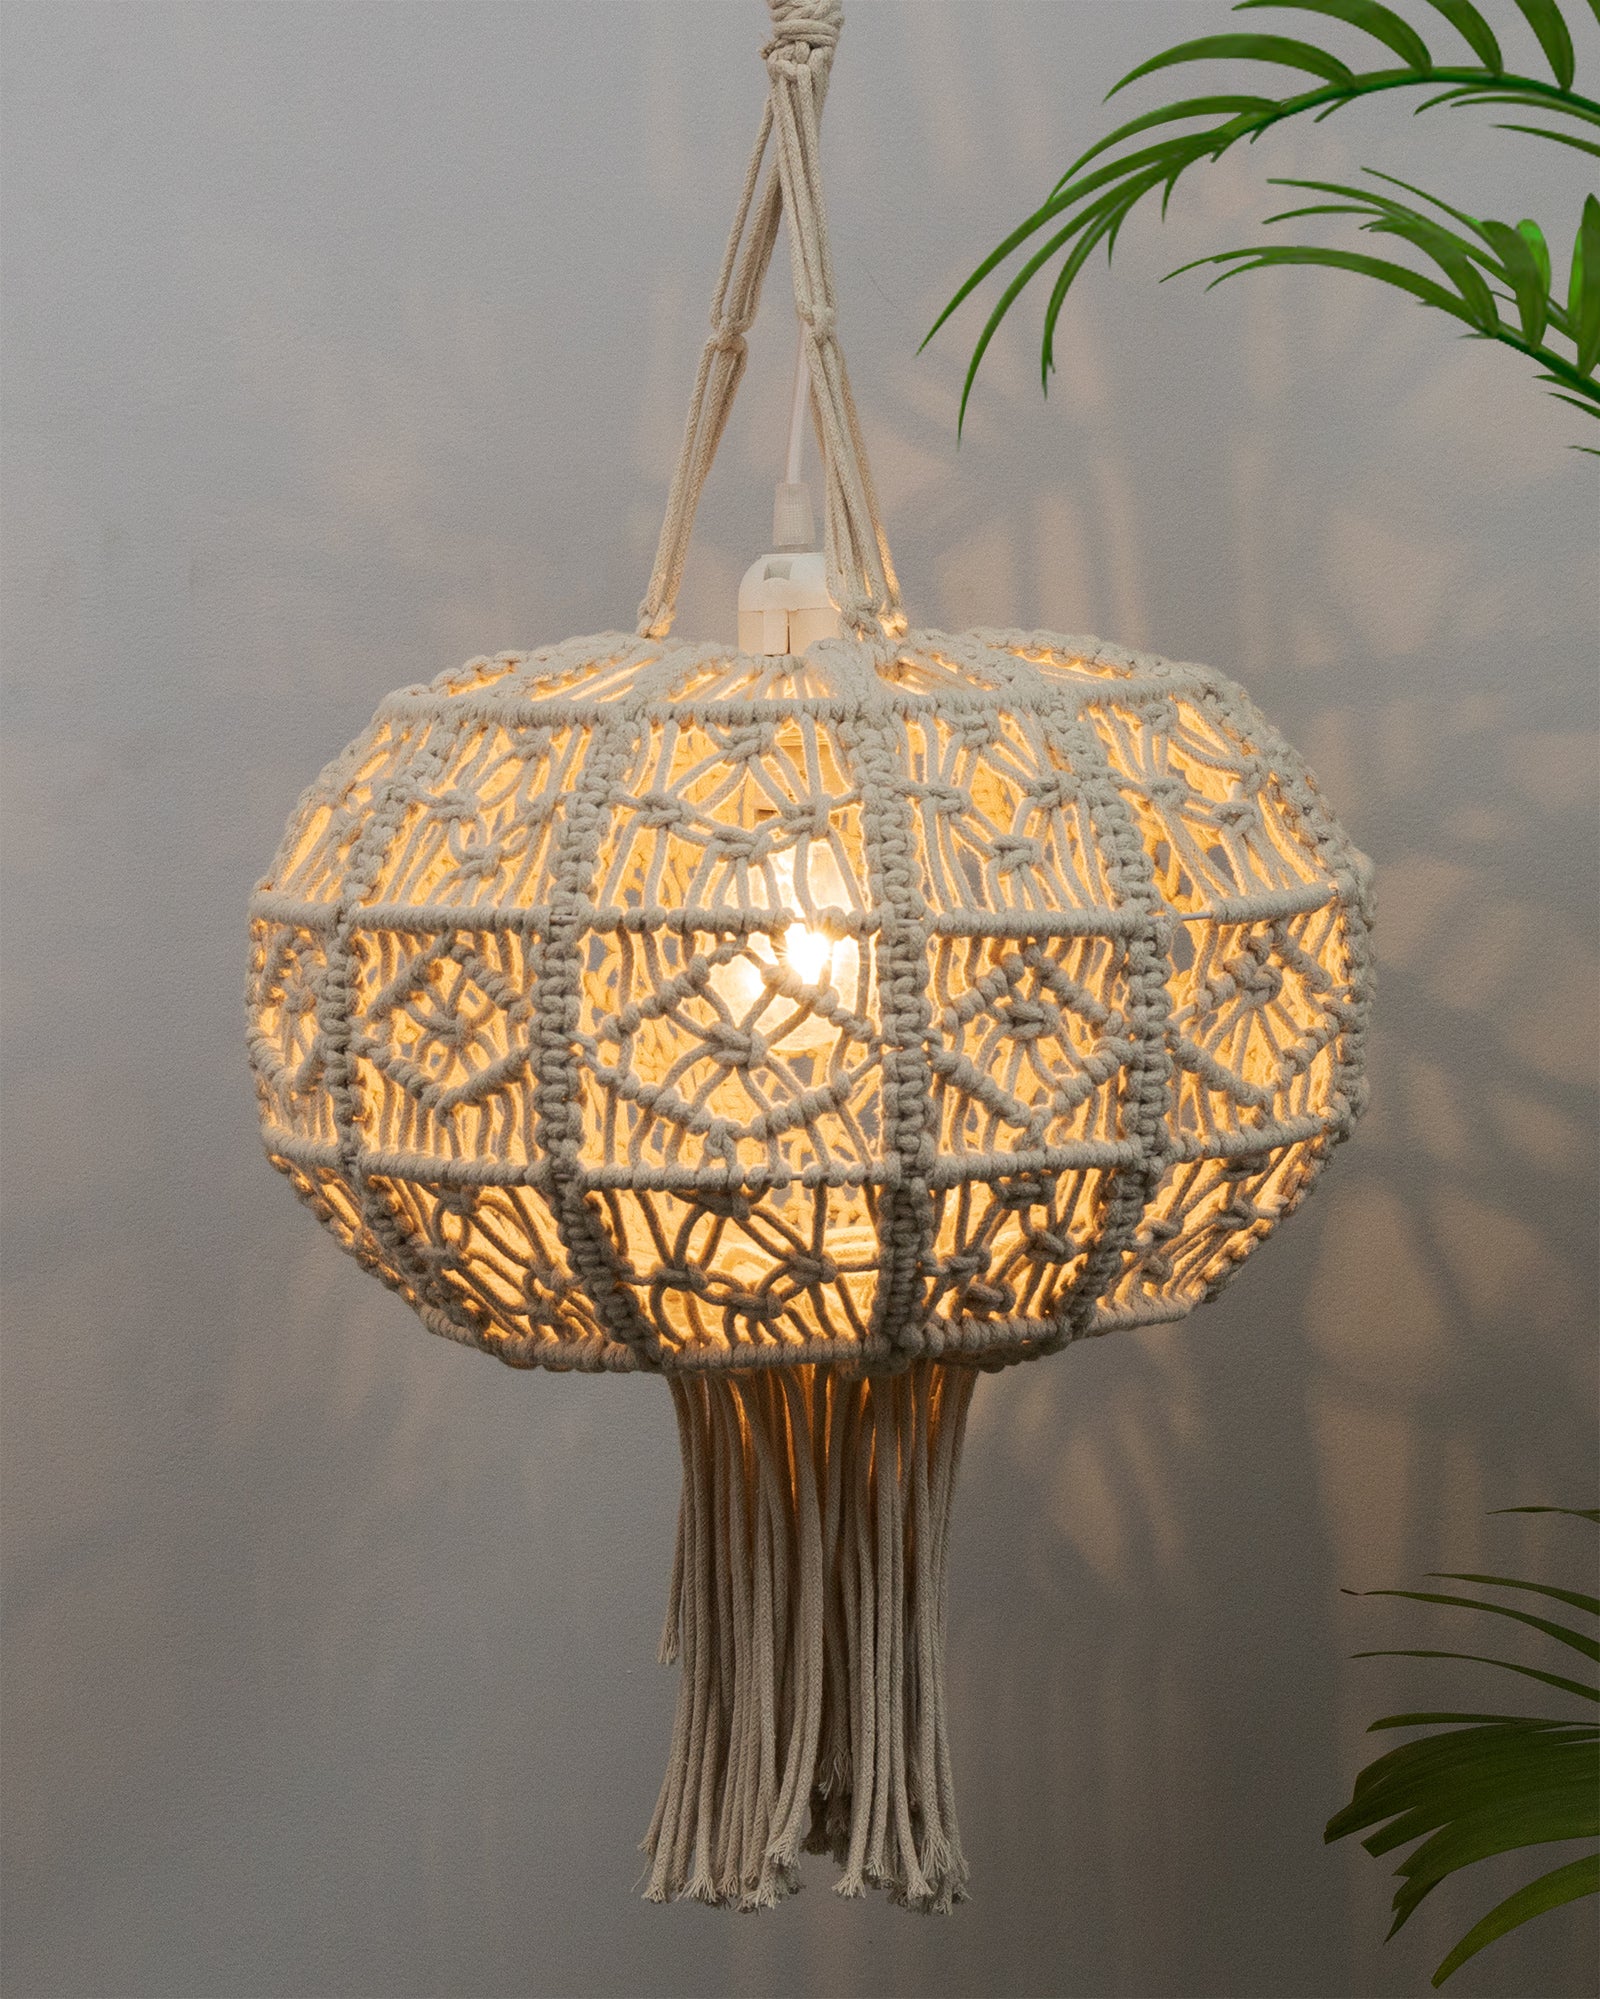 Incandescent Bulb Handmade Decorative Rope Hanging Light at Rs 500